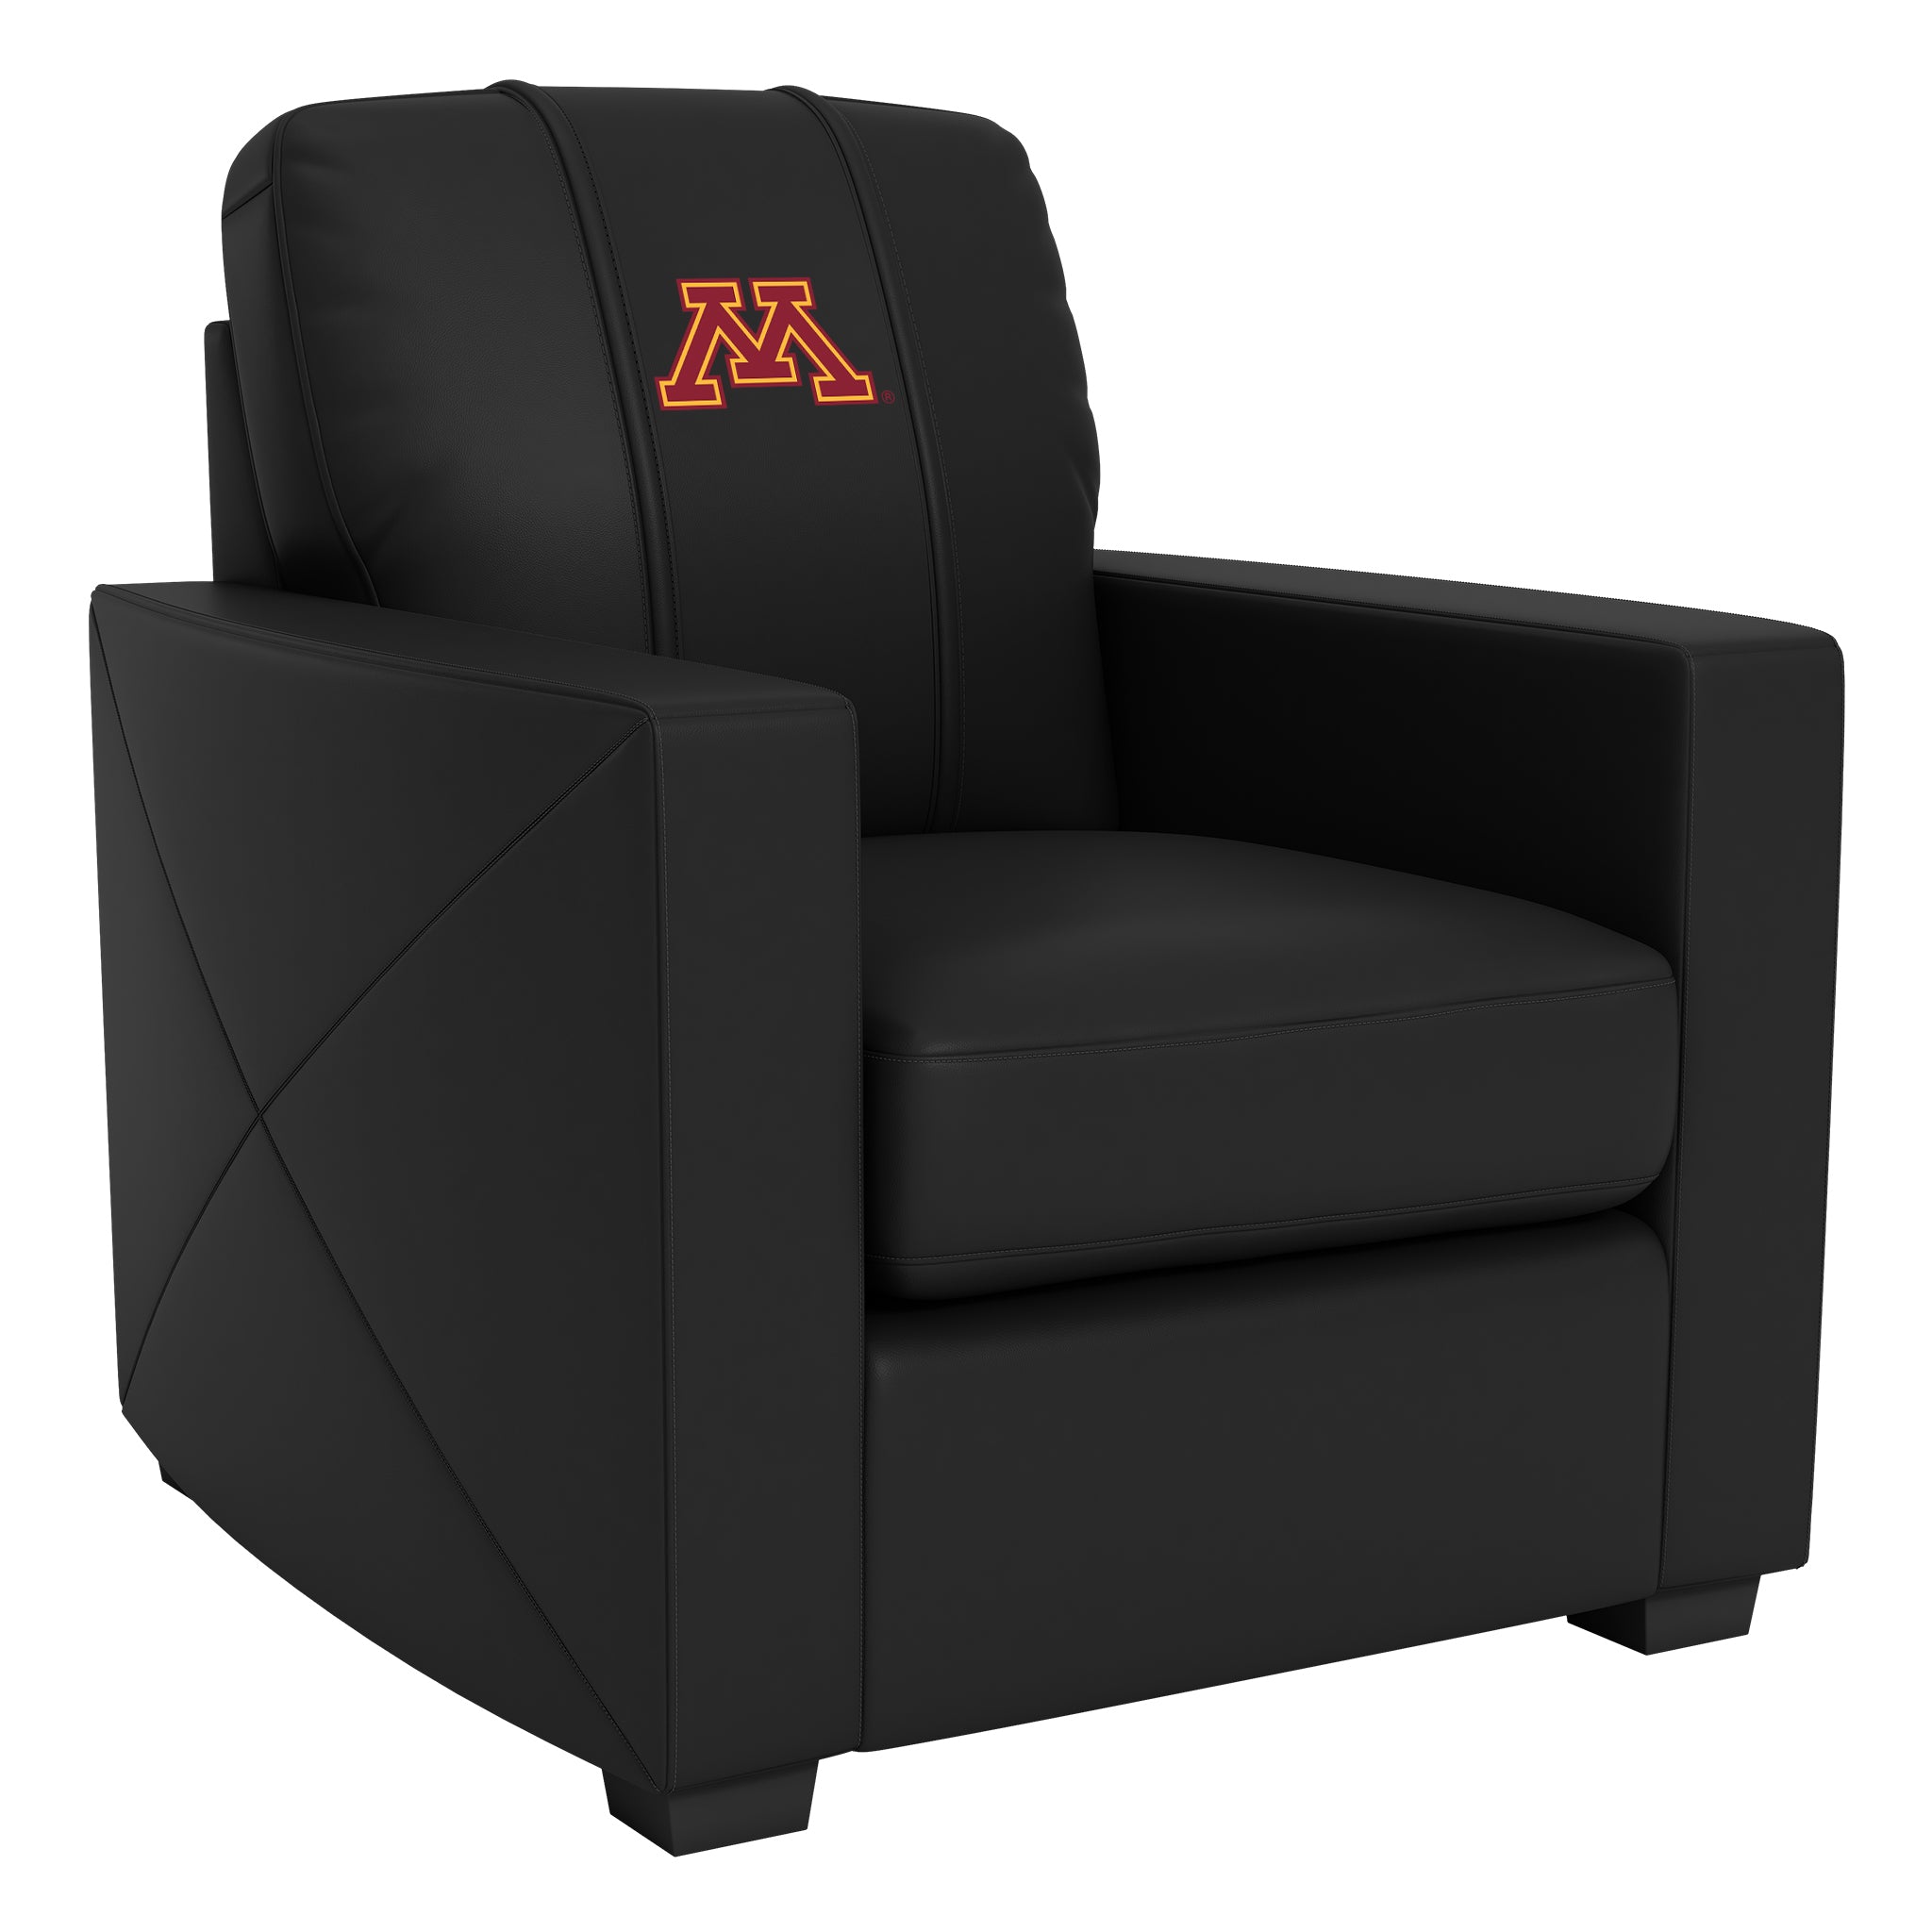 University of Minnesota Silver Club Chair with University of Minnesota Primary Logo